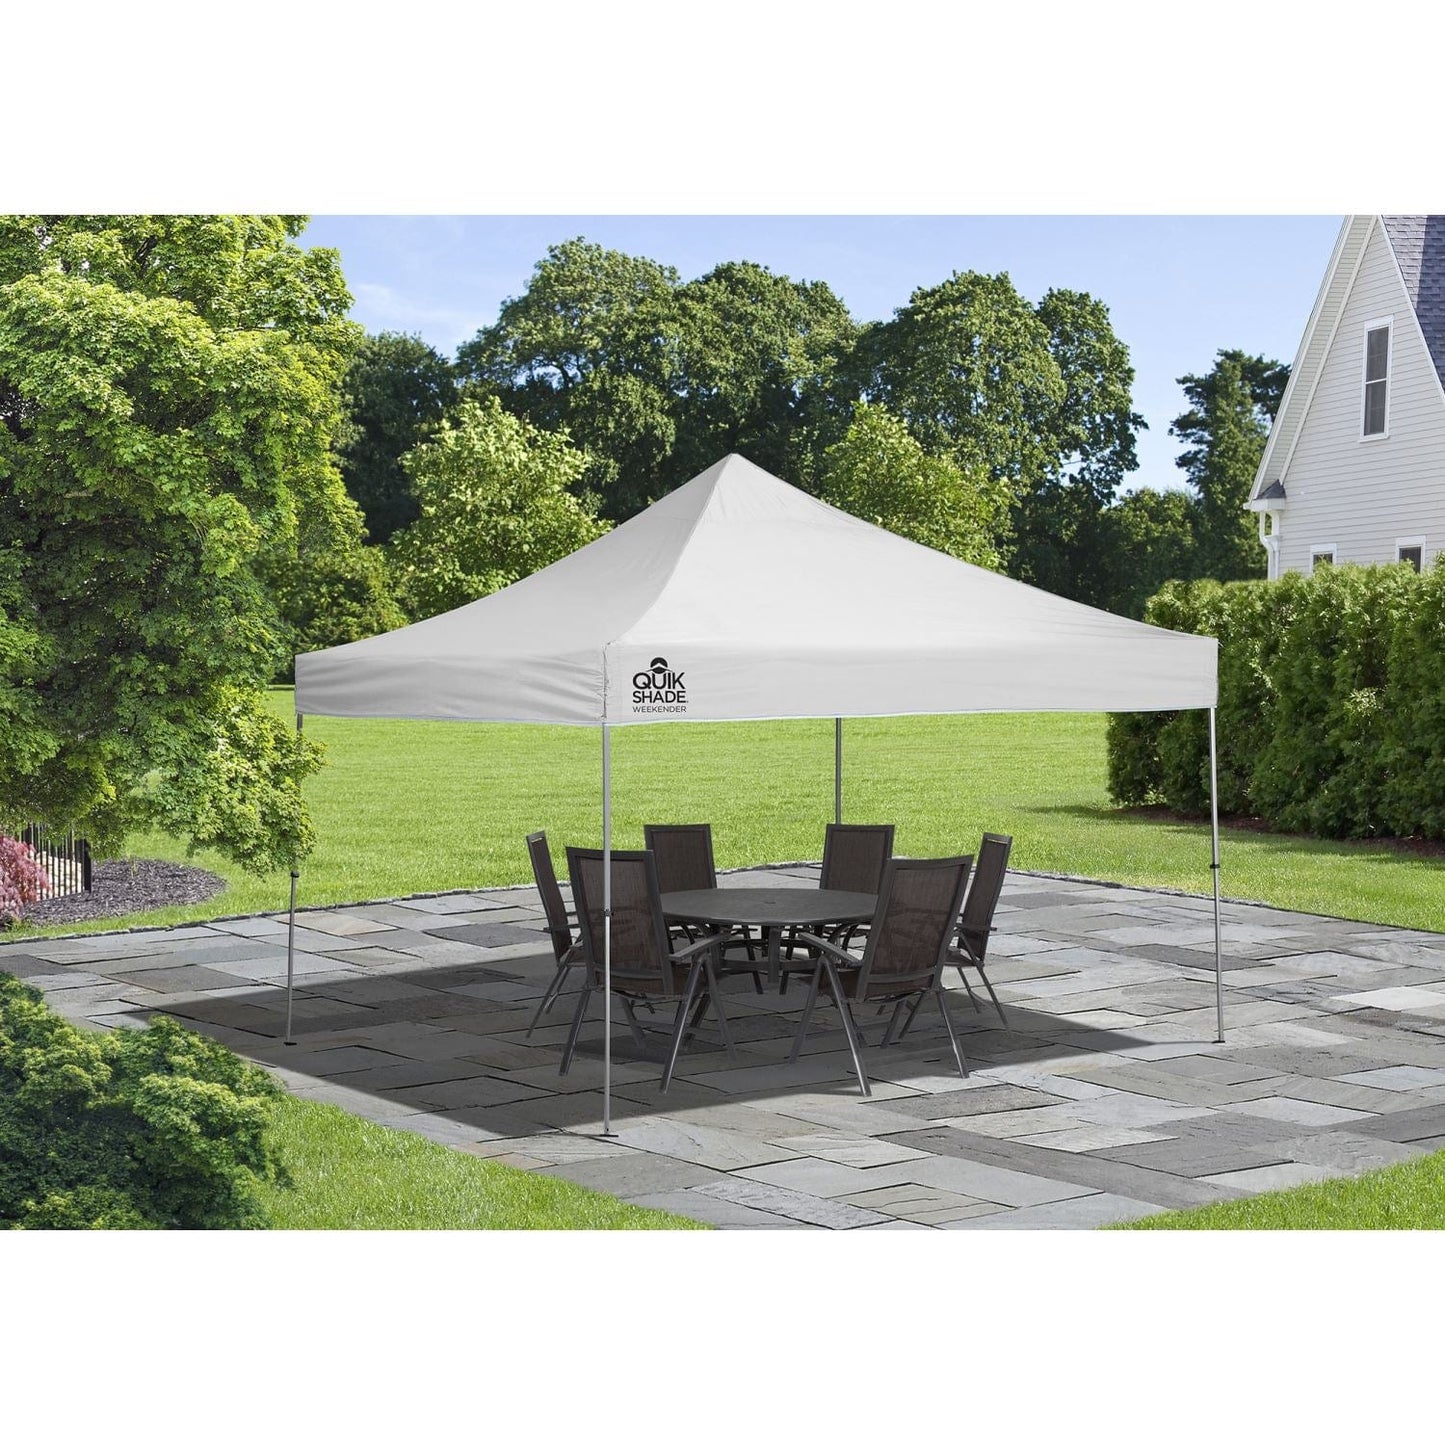 The Fulfiller Pop Up Canopies Quik Shade | Weekender Elite WE144 12' x 12' Straight Leg Canopy - White 167515DS